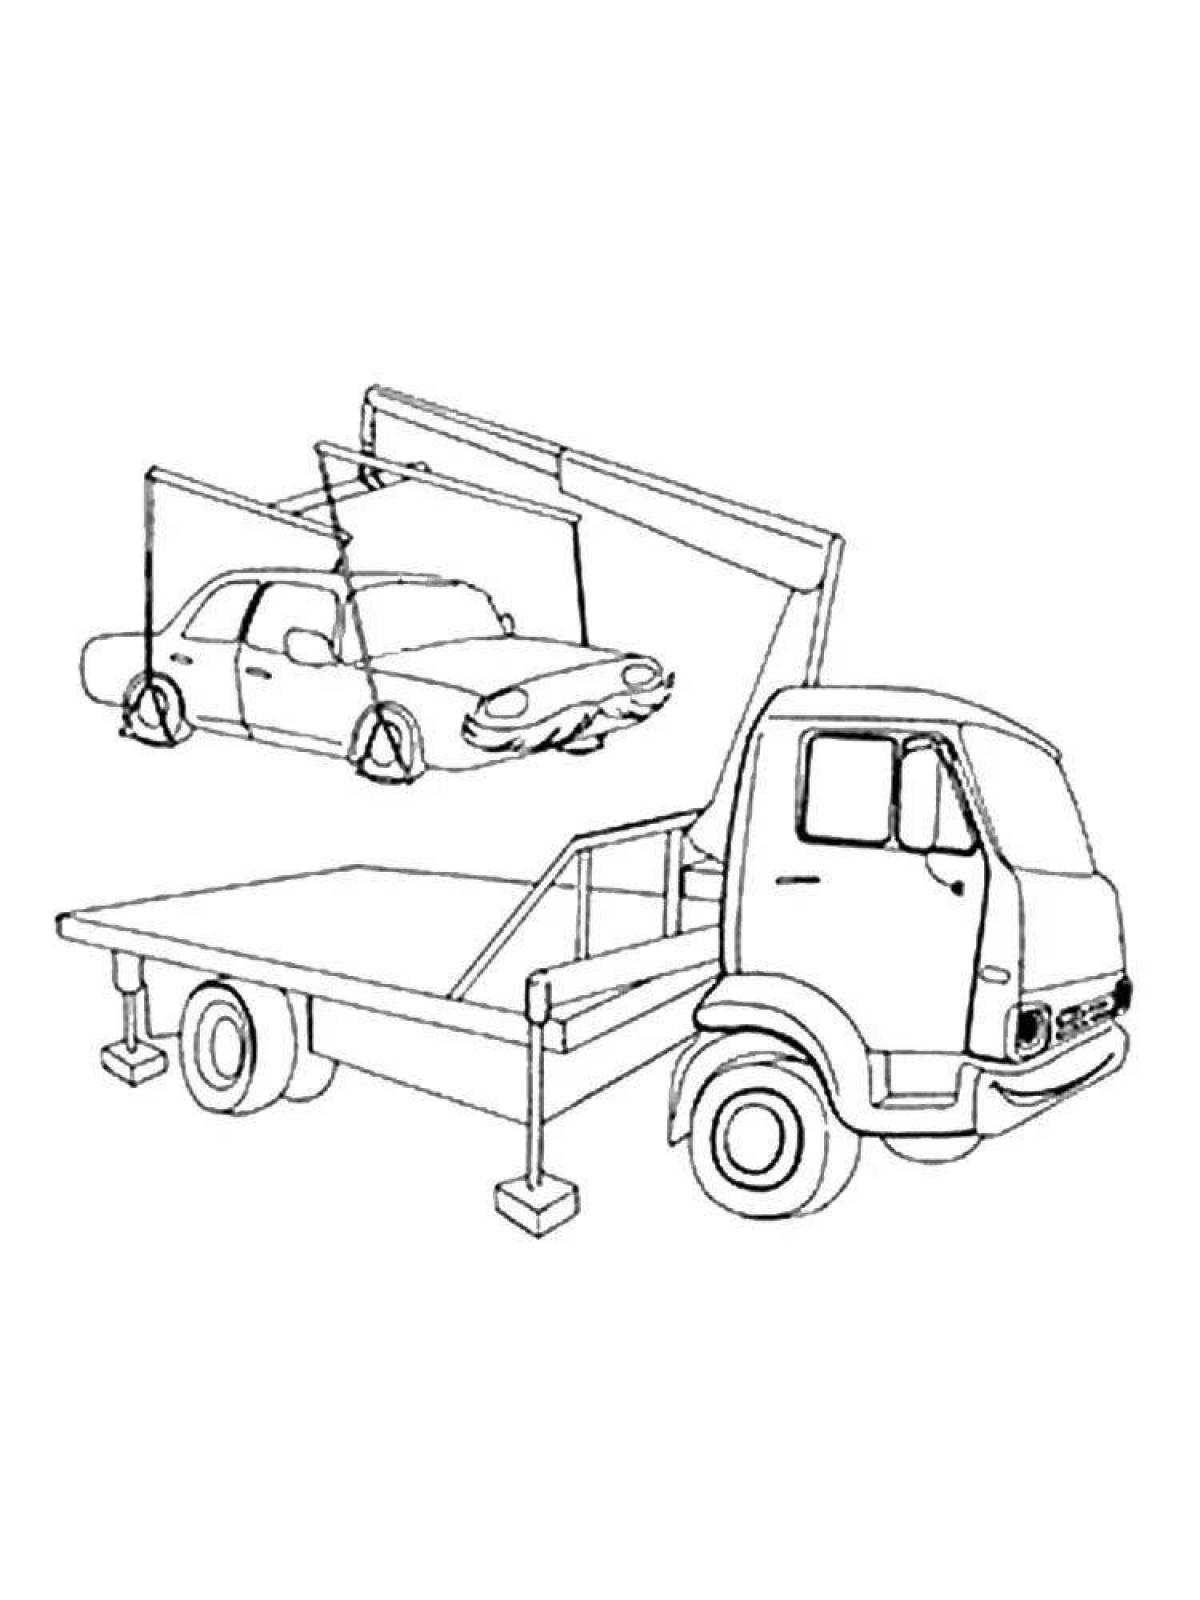 Adorable pickup tow truck coloring page